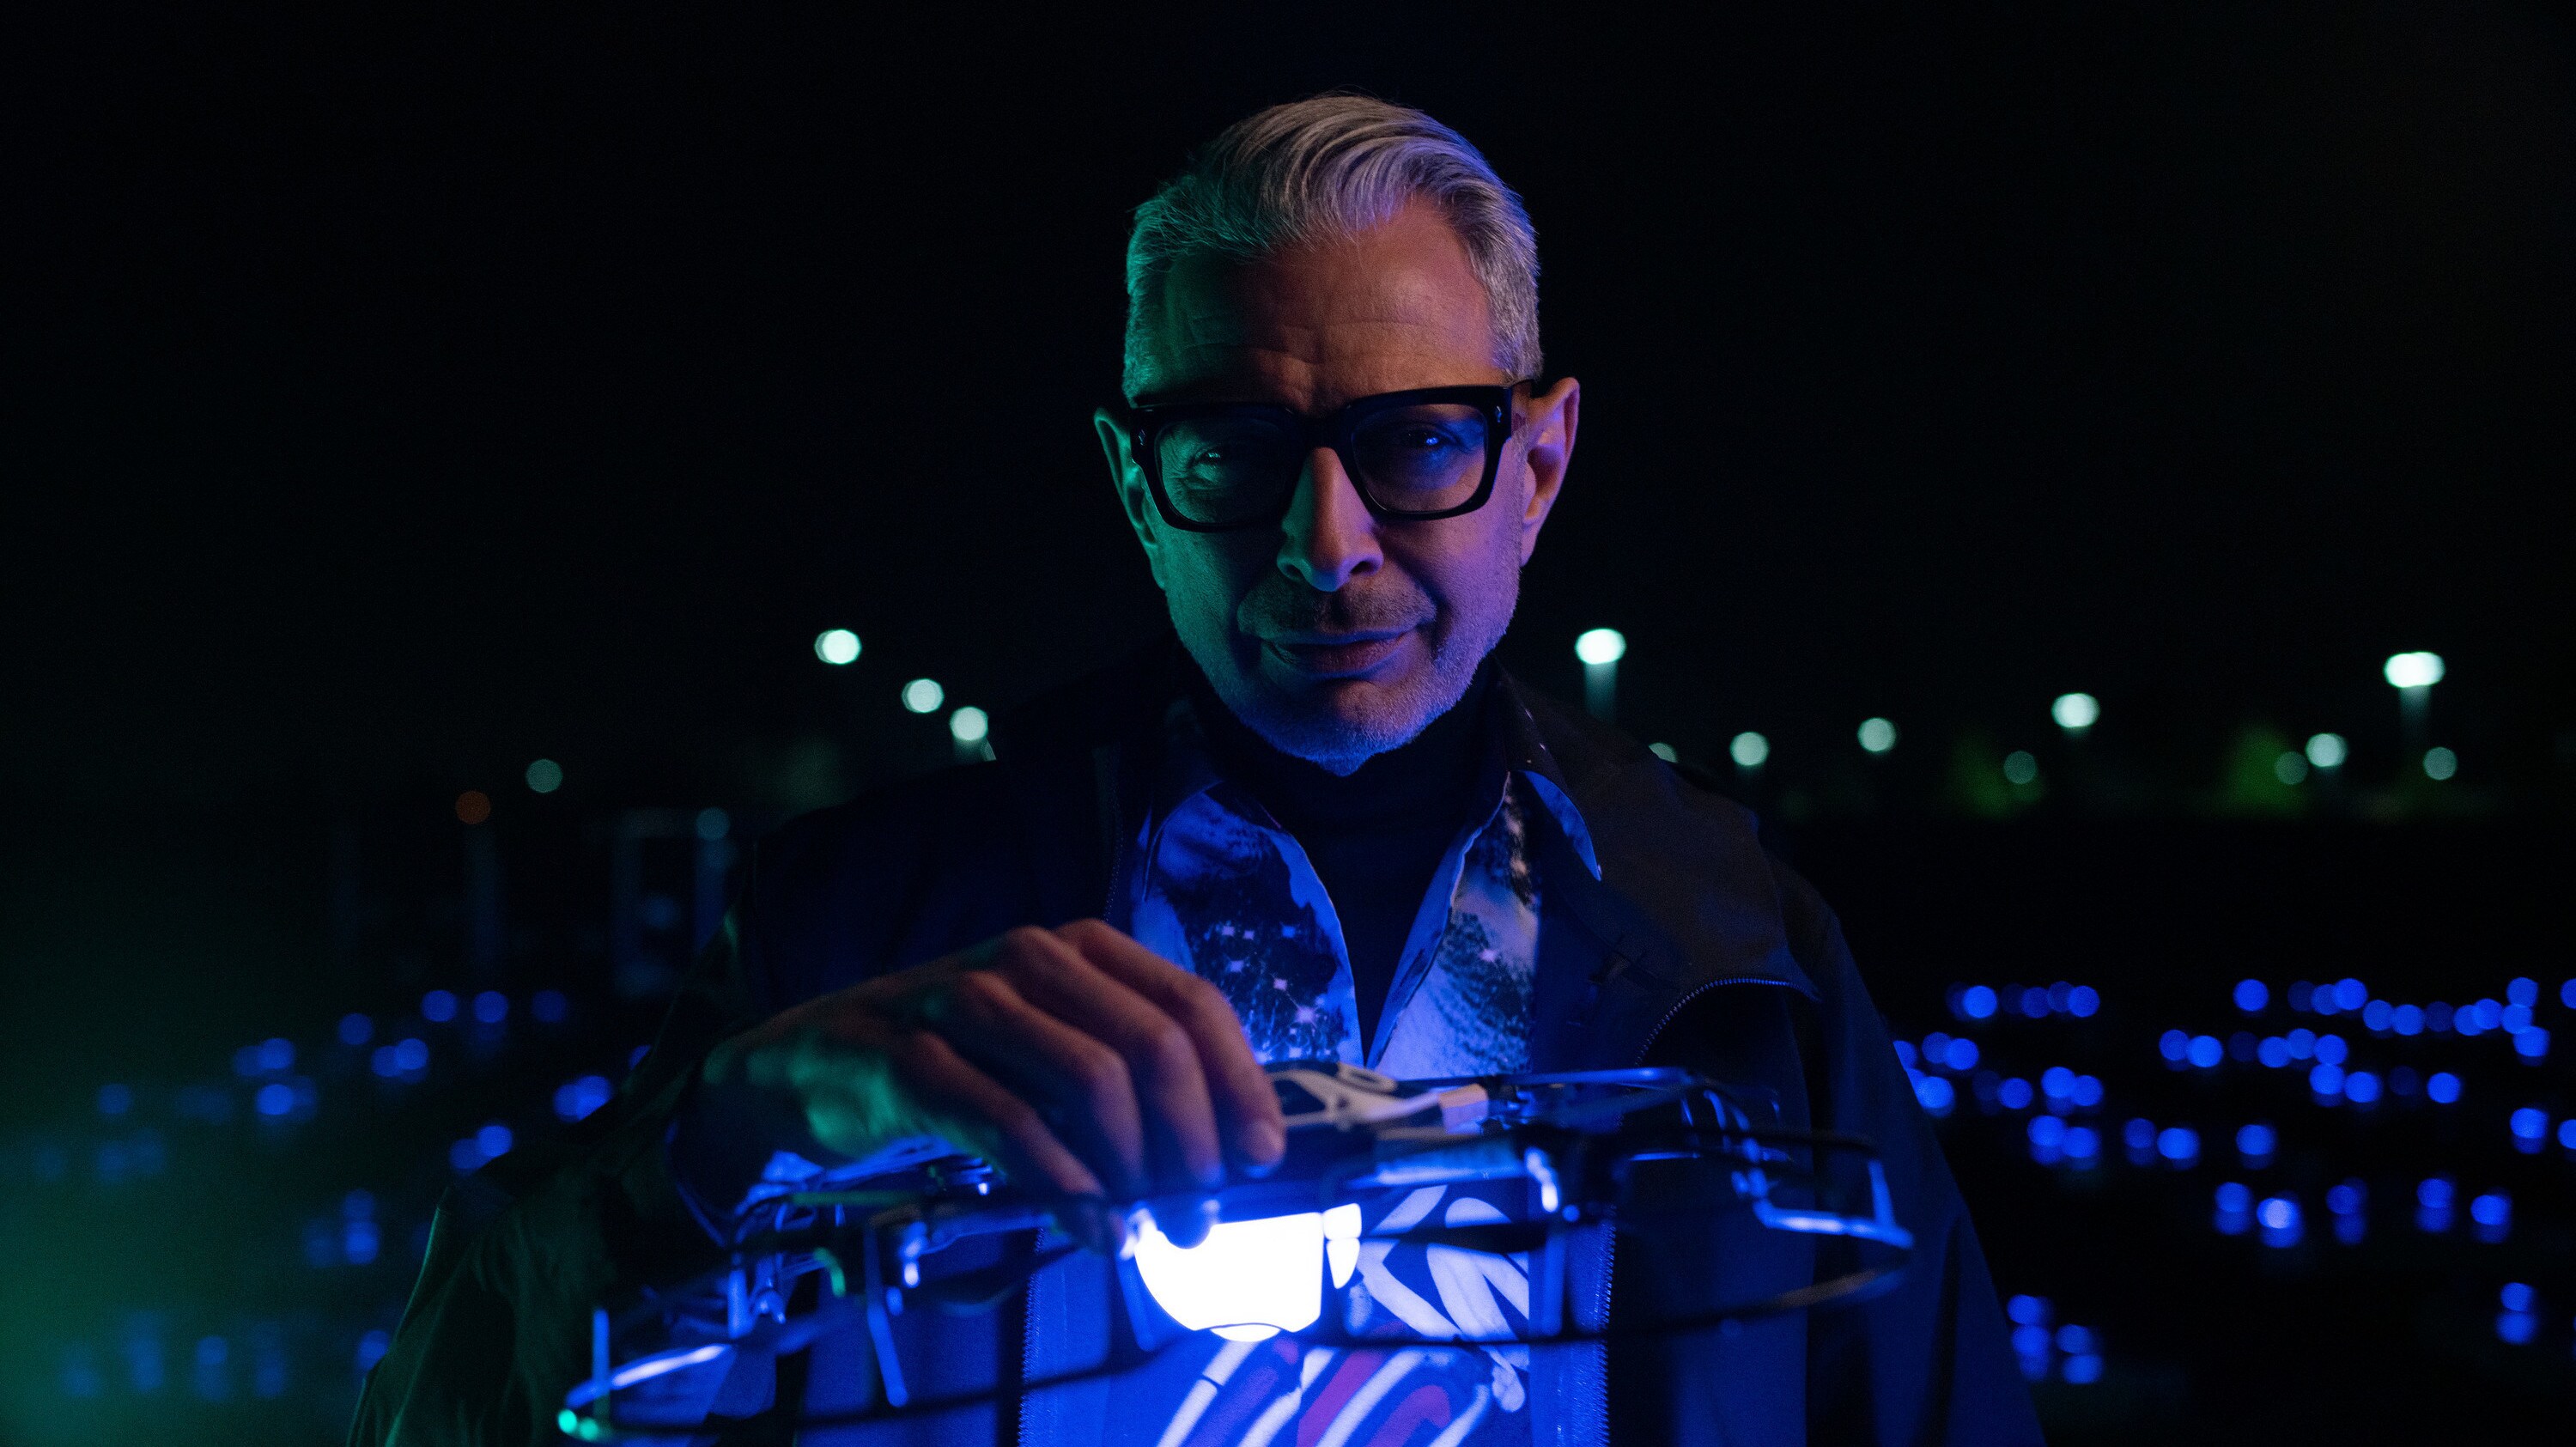 Folsom, CA - Jeff Goldblum holds an Intel drone that is used for light displays as an alternative to fireworks. (Credit: National Geographic/Justin Koenen)